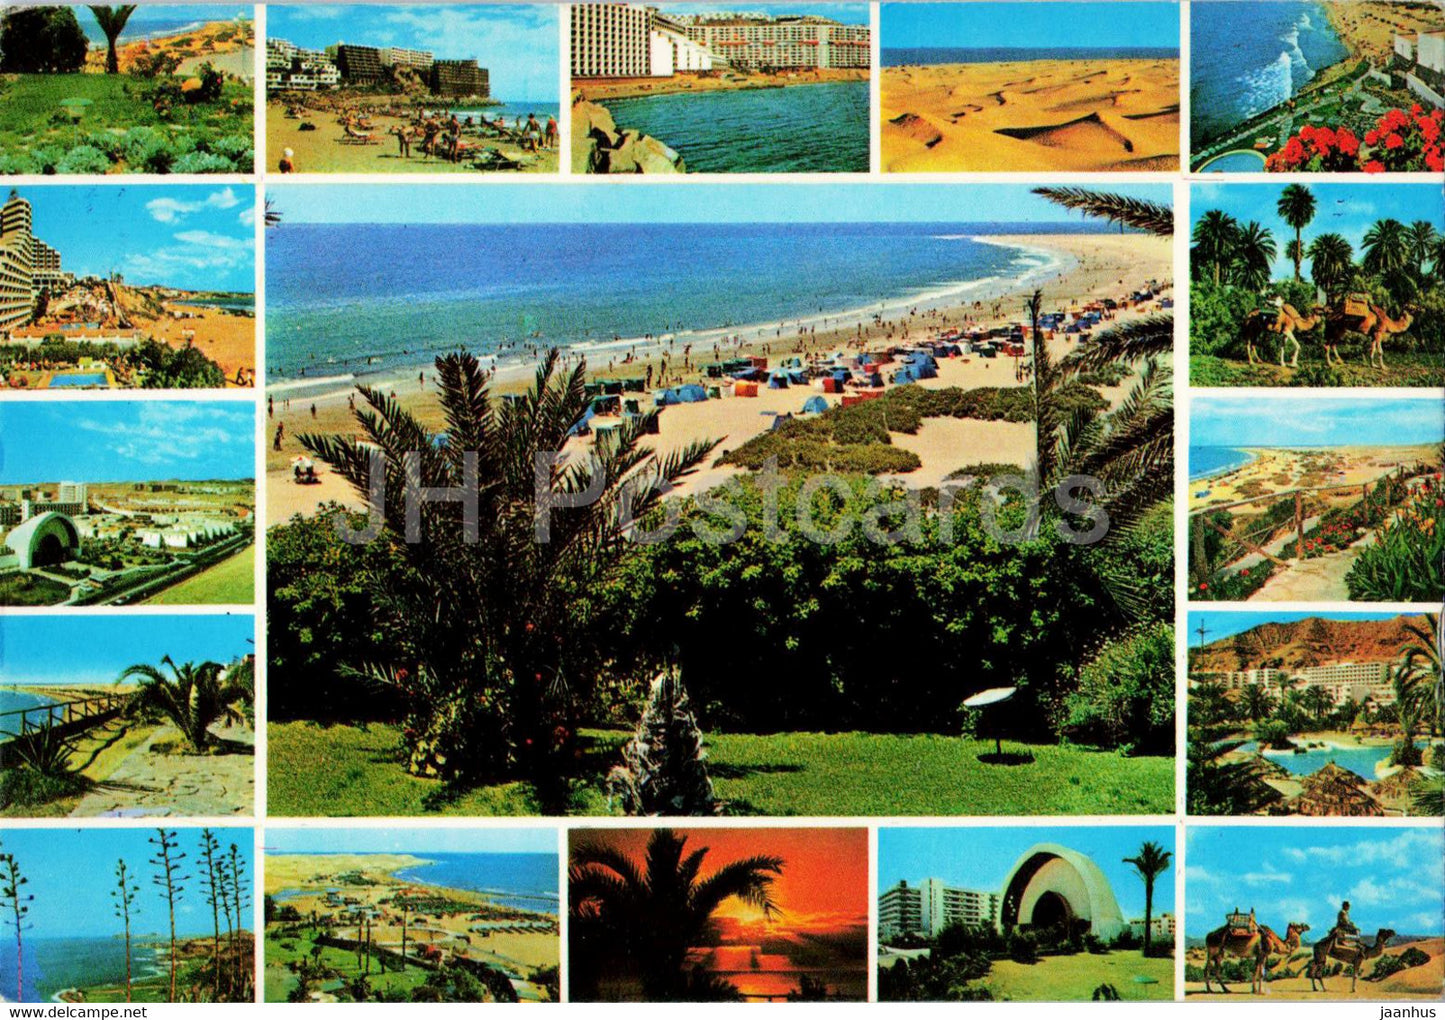 Souvenirs Playa del Ingles - Gran Canaria - multiview - Spain - used - JH Postcards